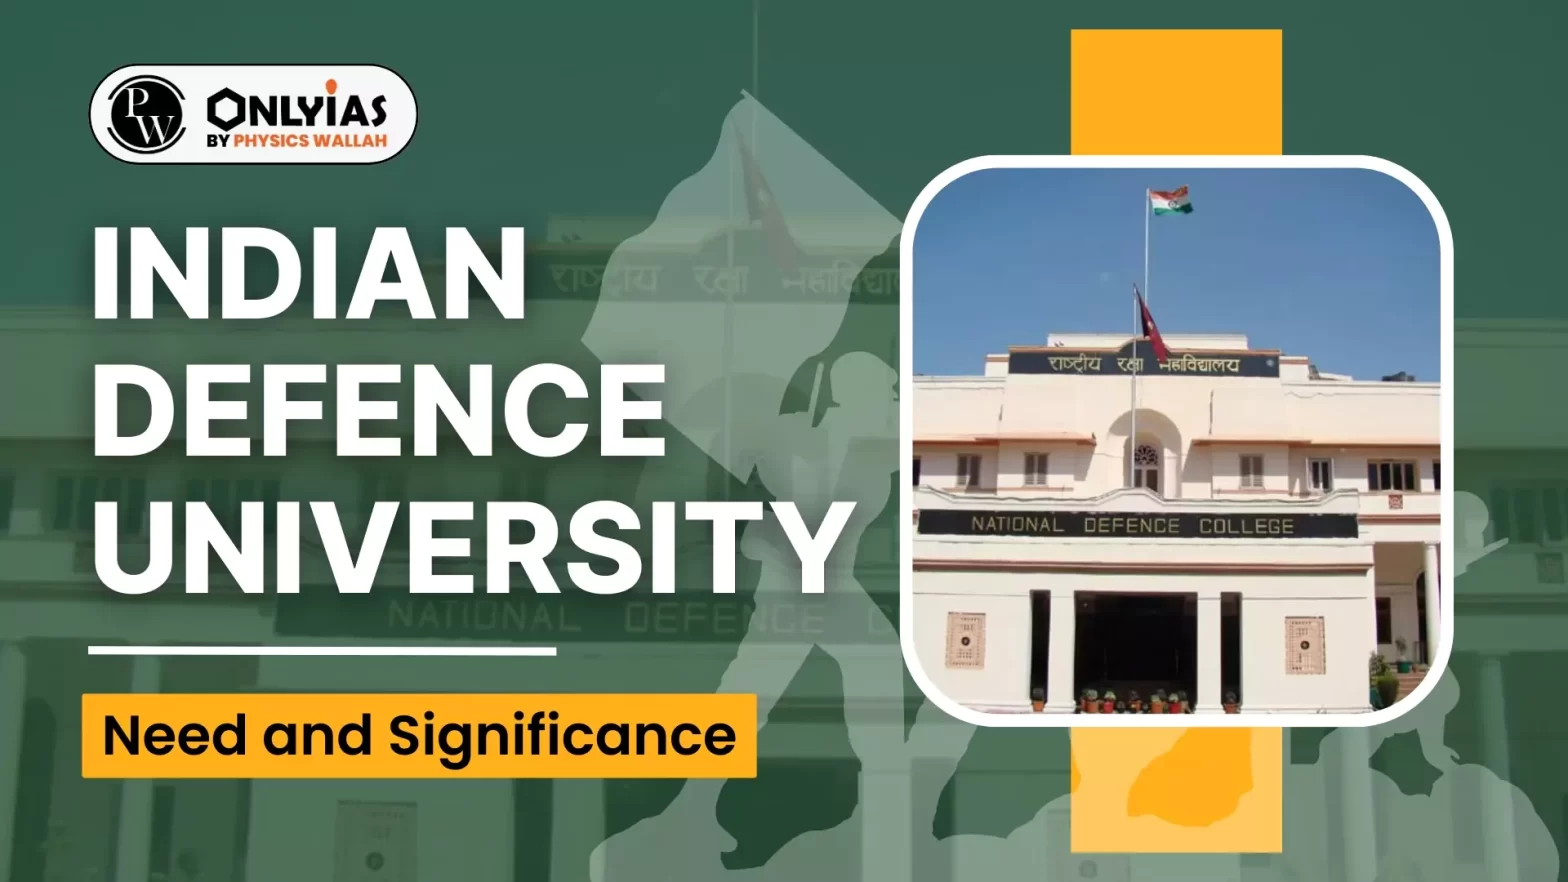 Indian Defence University: Need and Significance